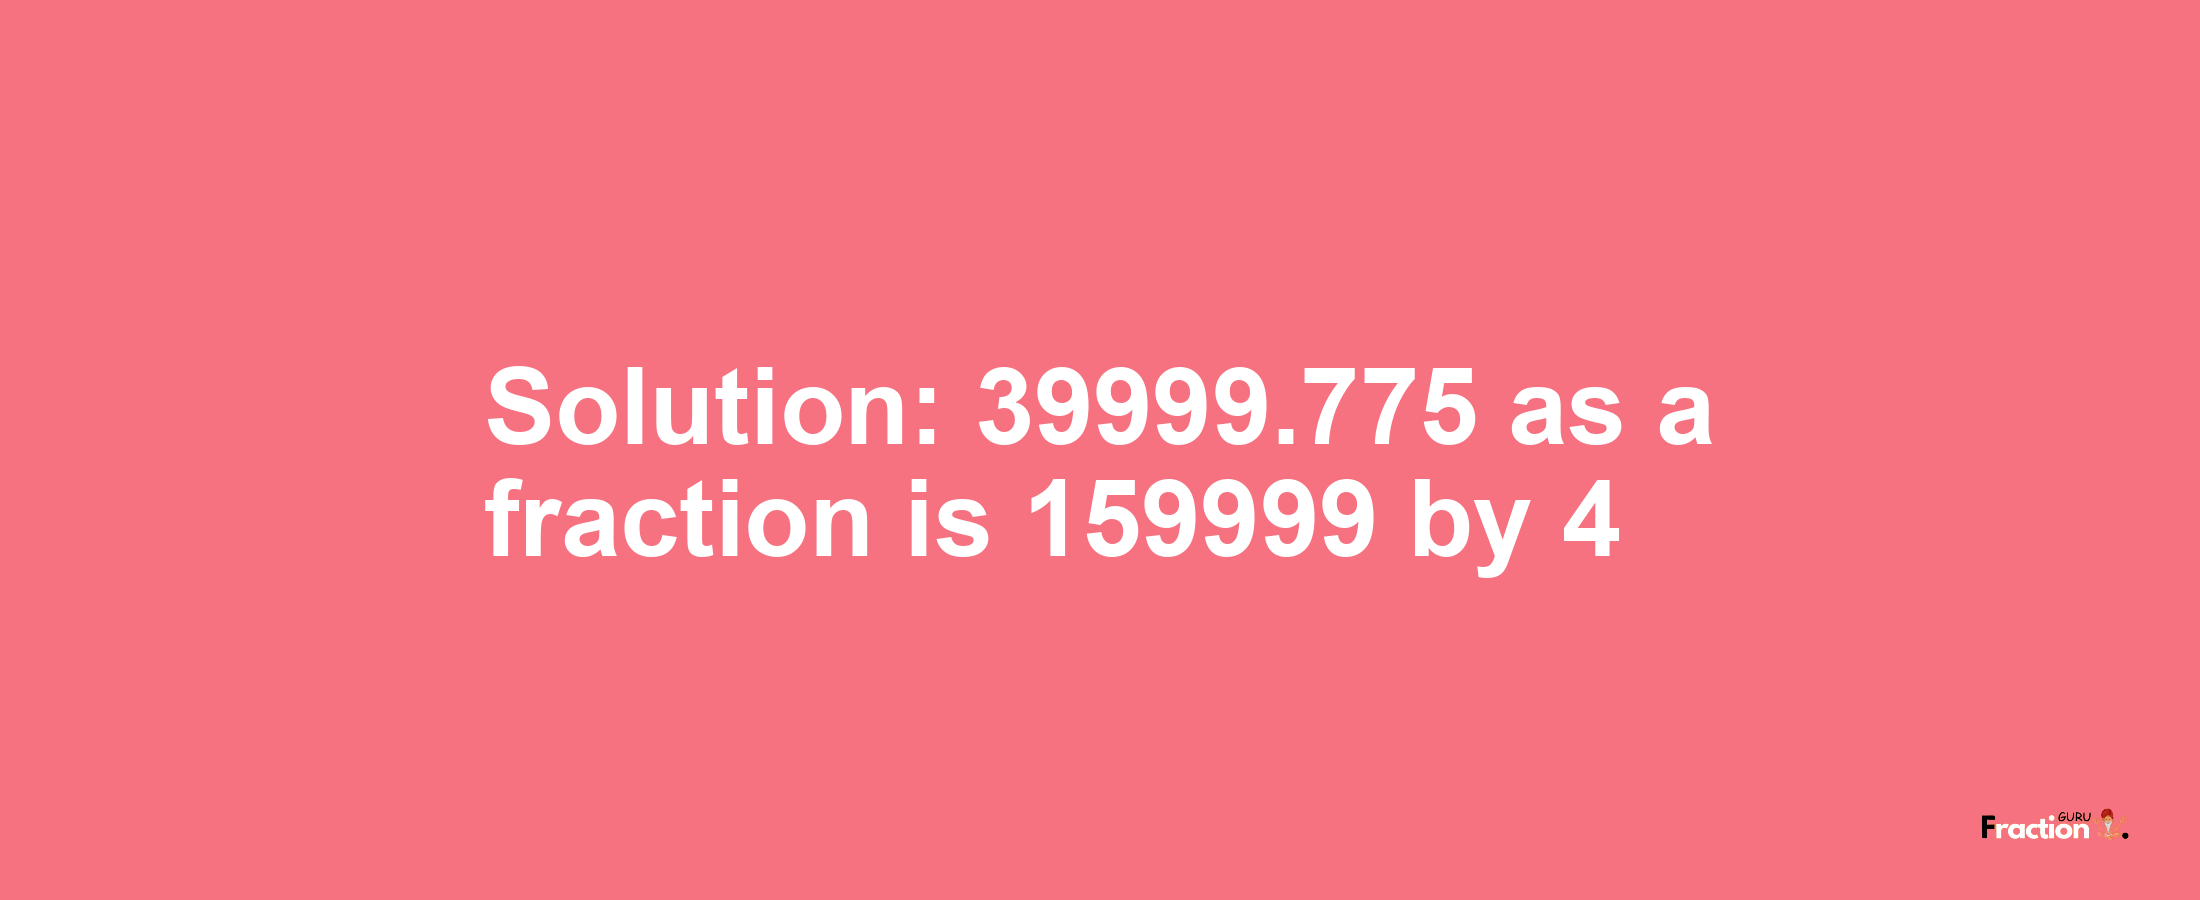 Solution:39999.775 as a fraction is 159999/4